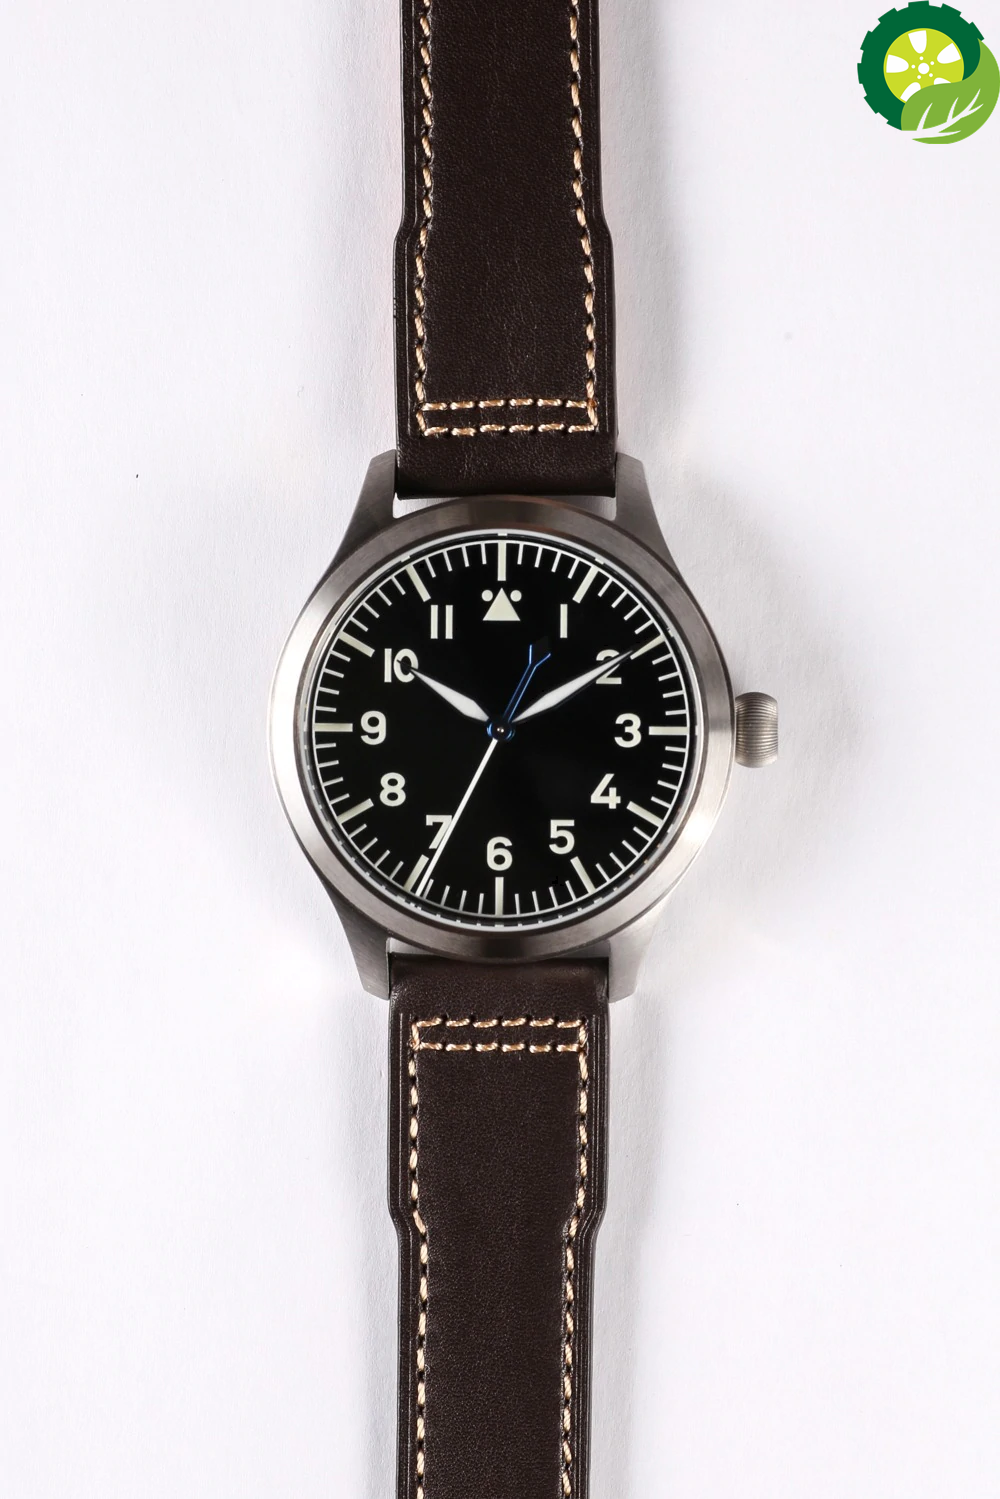 Automatic Movement Pilot Watch with Black Dial and 42mm Case waterproof 300M